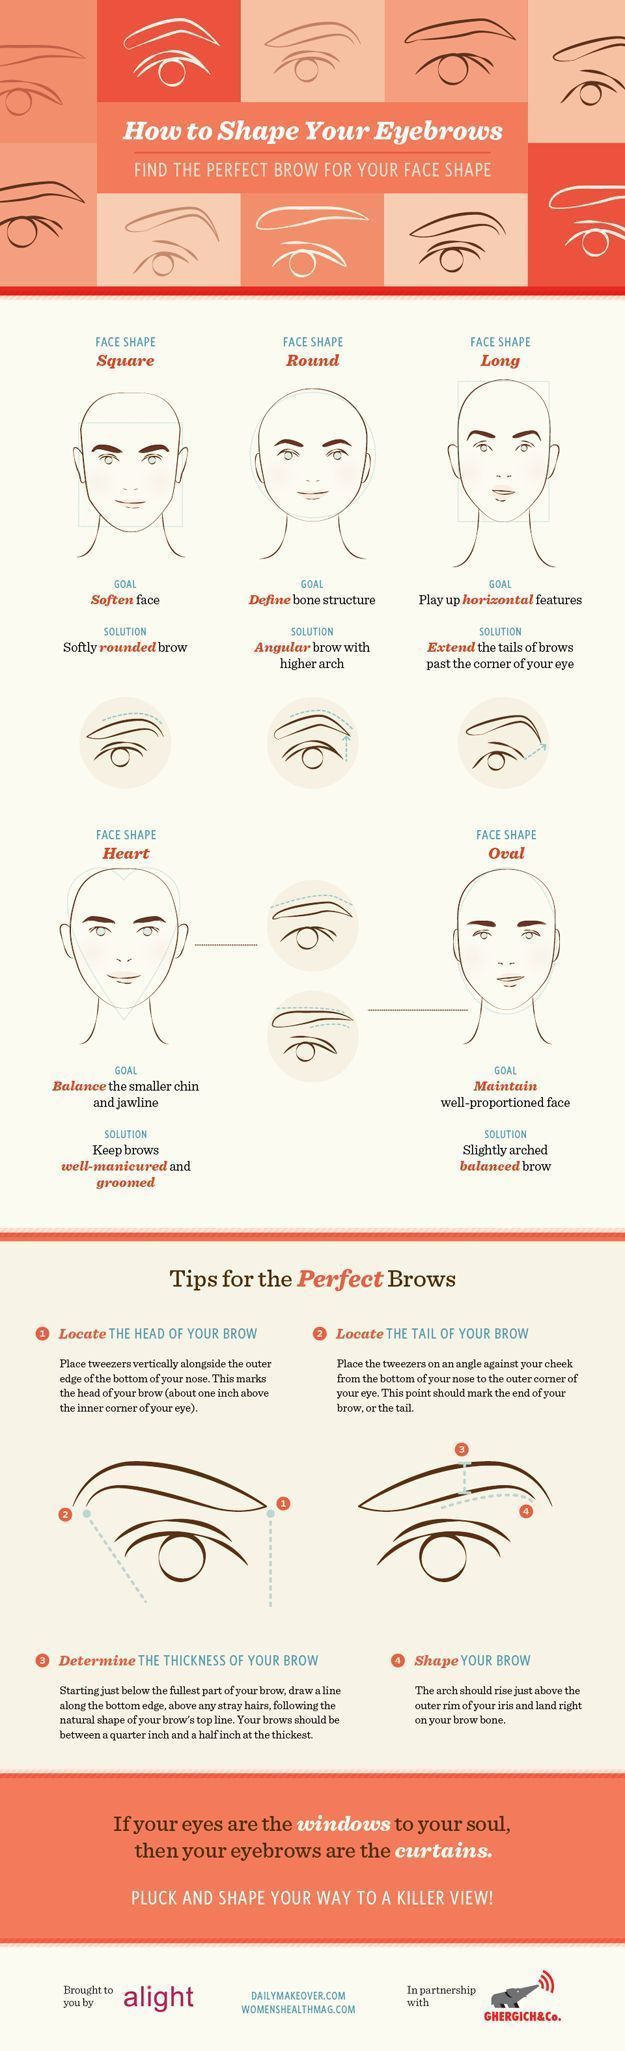 Best Brows for Your Face Shape | Eyebrow Shaping Tutorial - DIY Eyebrow Plucking...